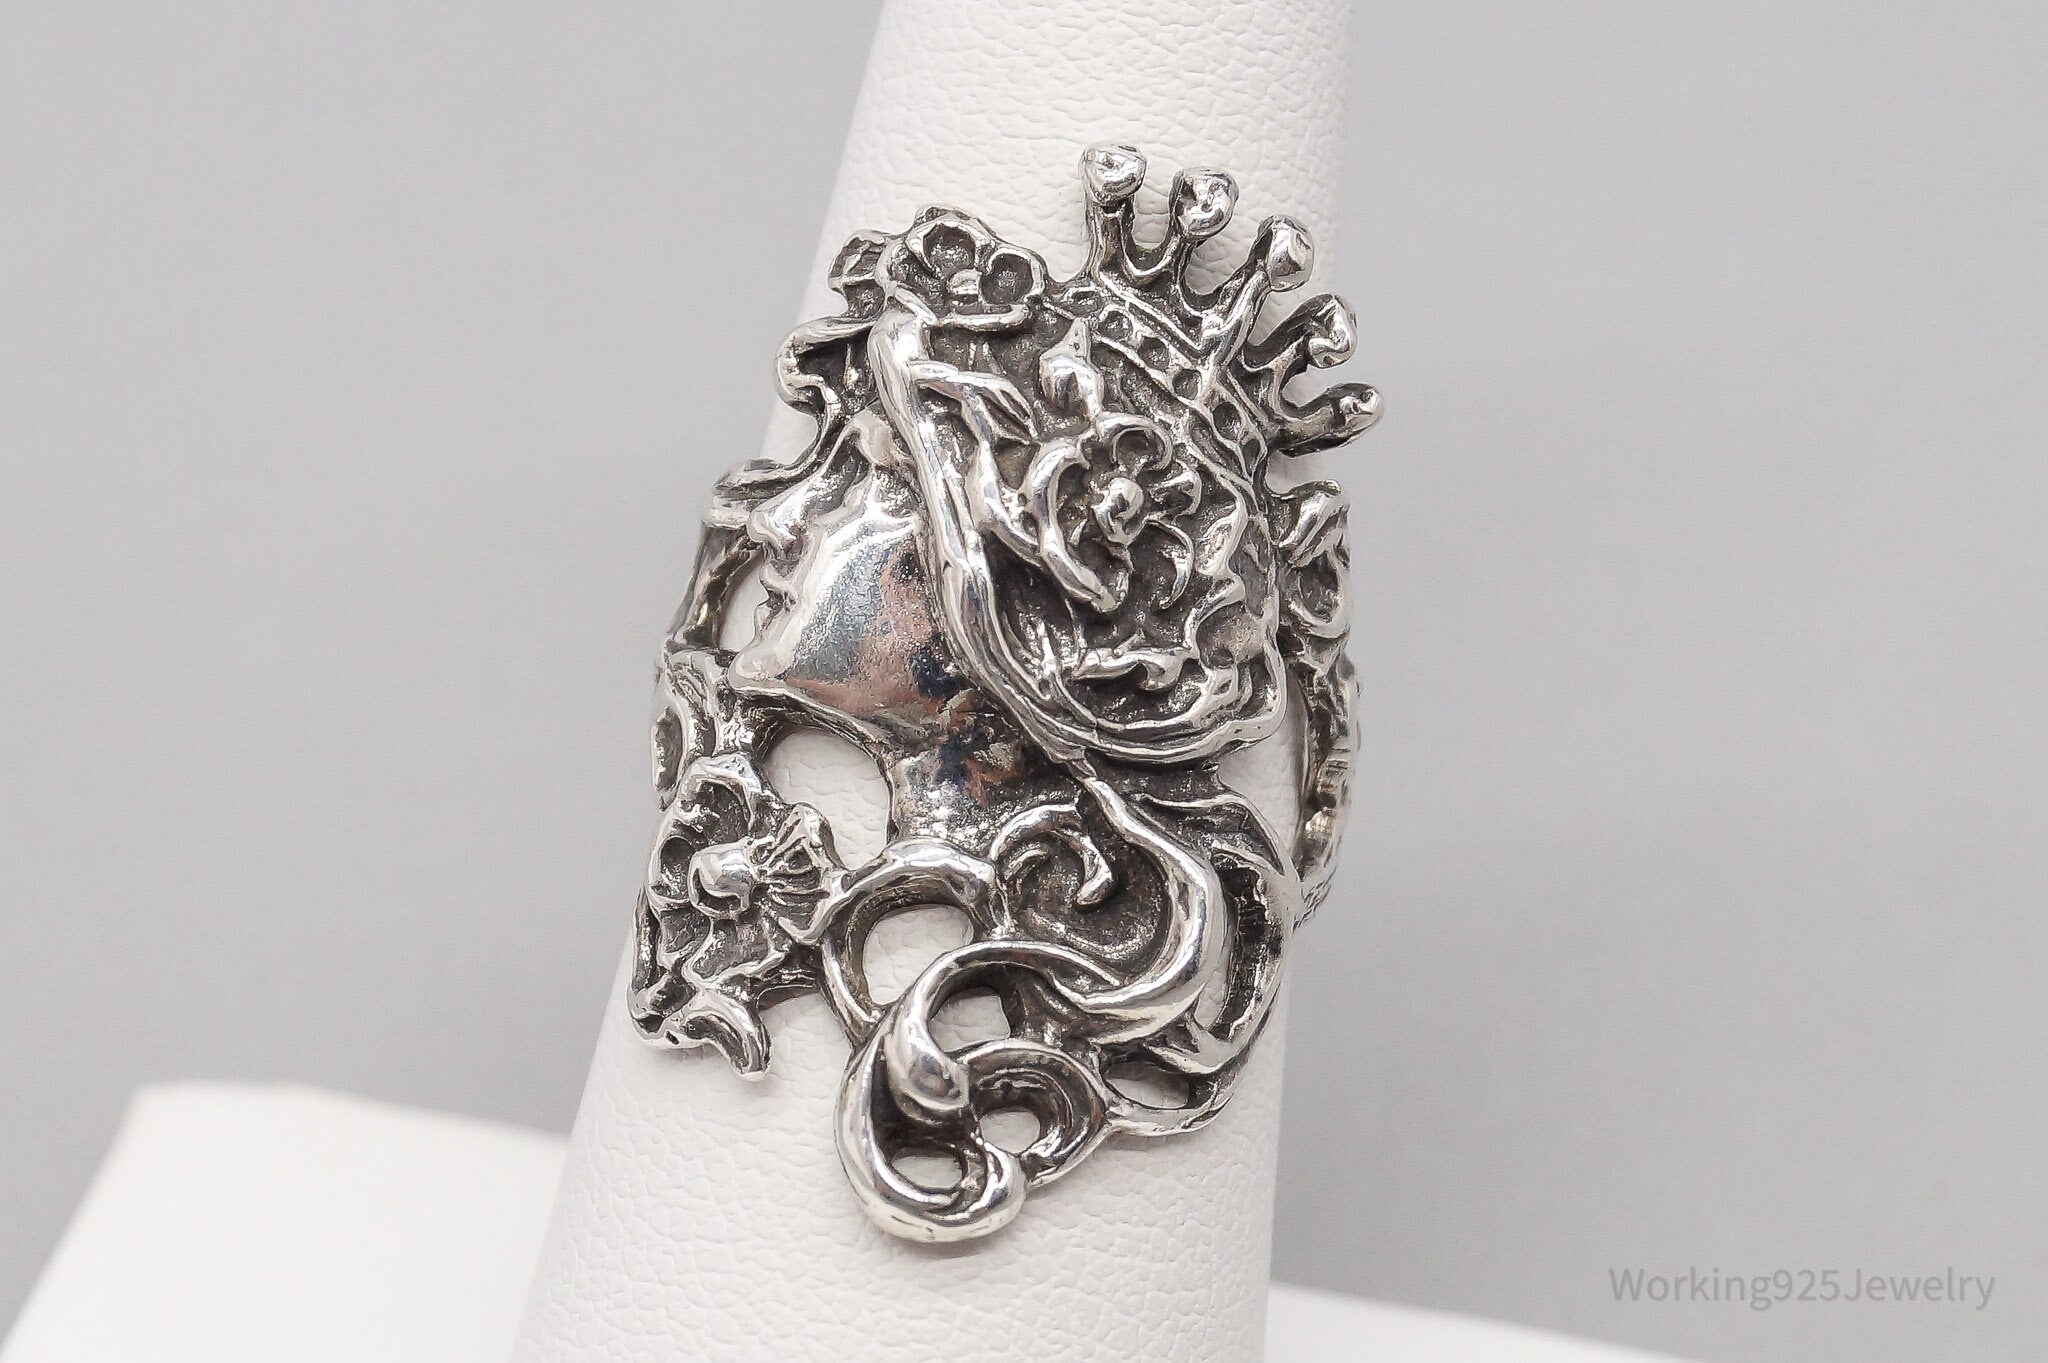 Vintage Art Nouveau Style Queen Sterling Silver Ring - Size 7